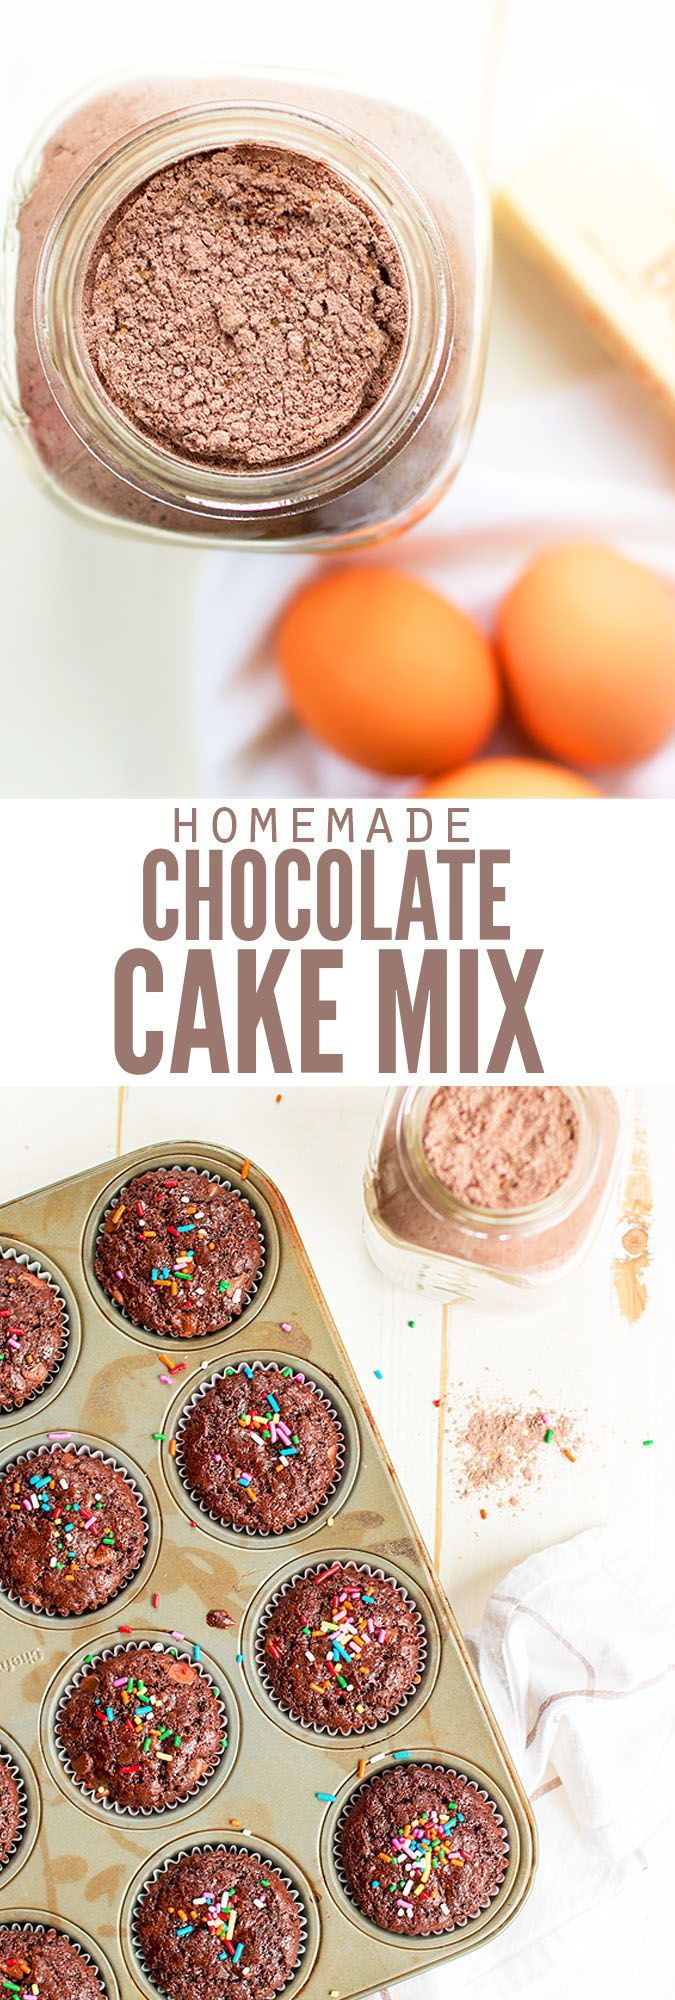 Homemade Chocolate Cake Mix -   12 cake Mix from scratch ideas